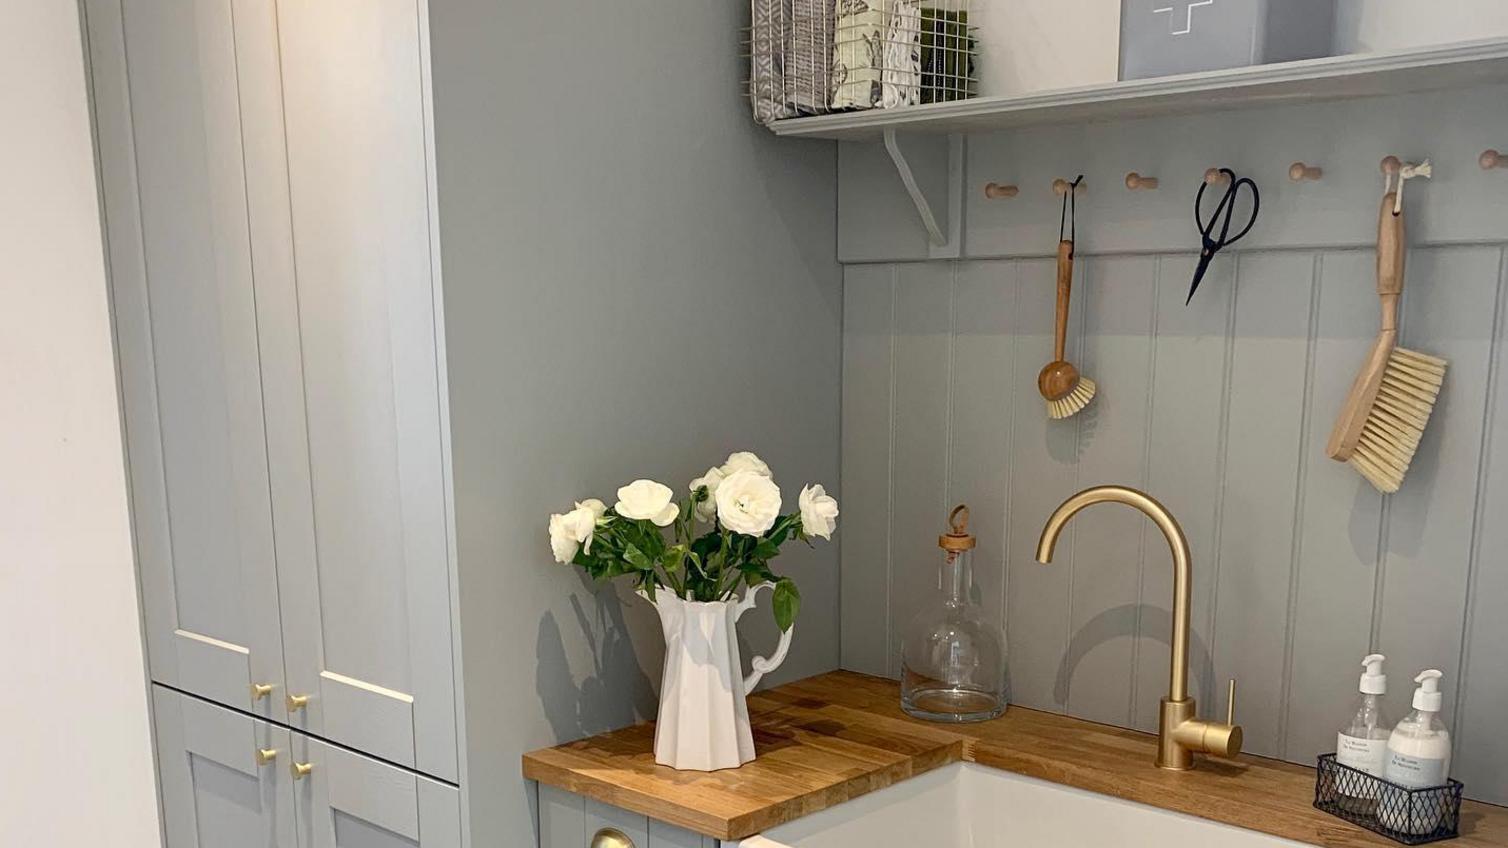 Grey shaker utility room idea with gold tap and handles, wood worktop, and wall pannelling.